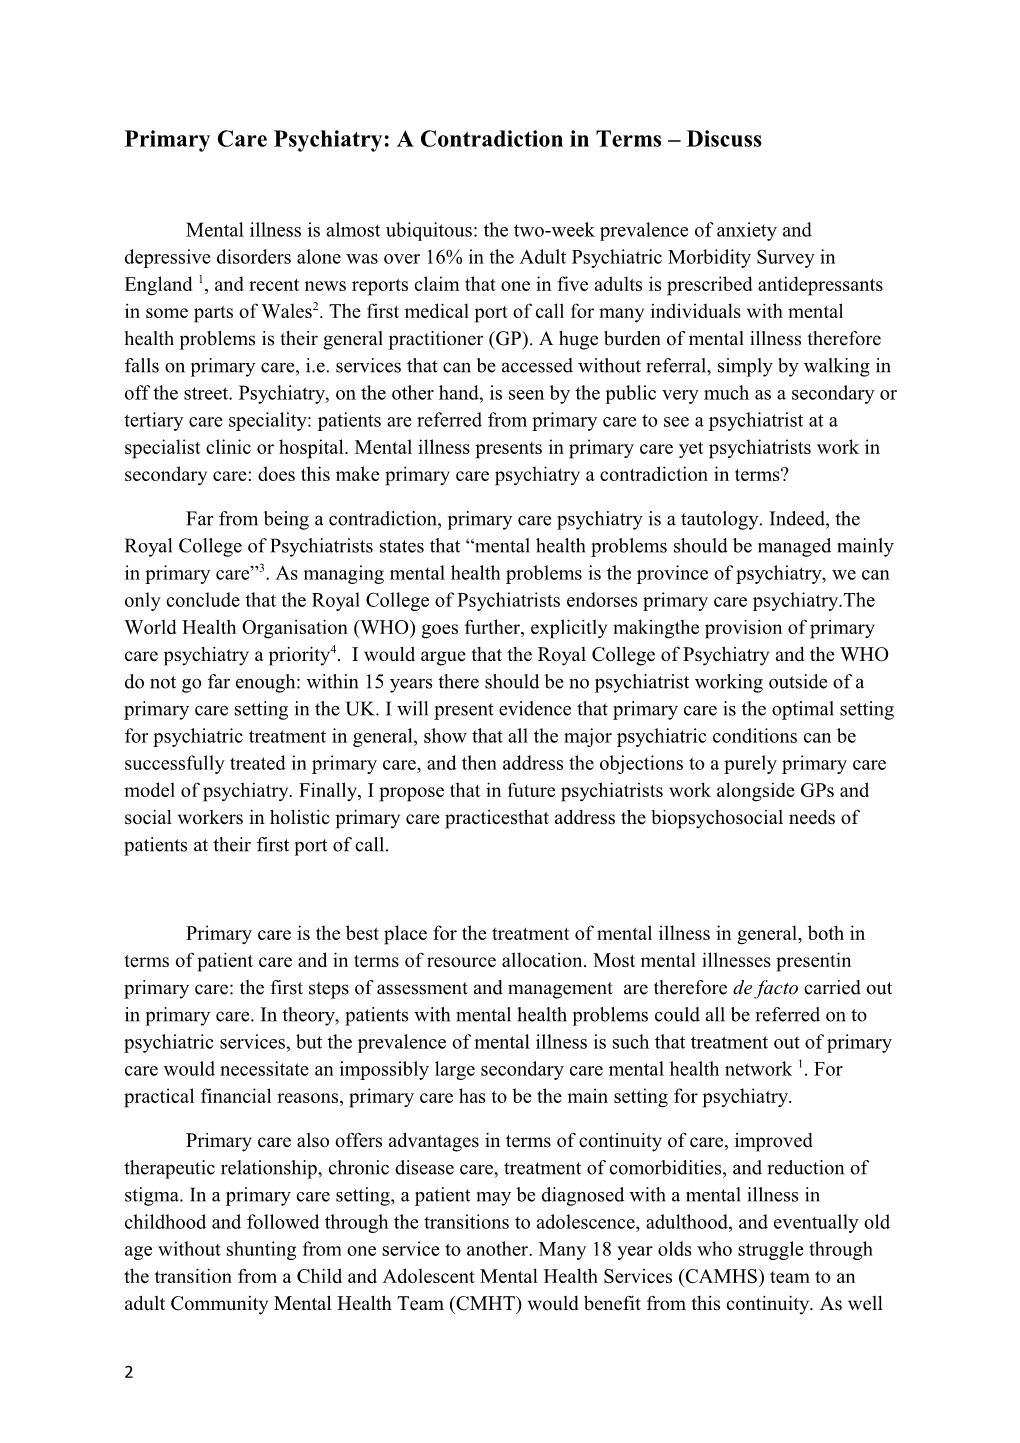 Submission for the Medical Student Essay Prize in General and Community Psychiatry 2013